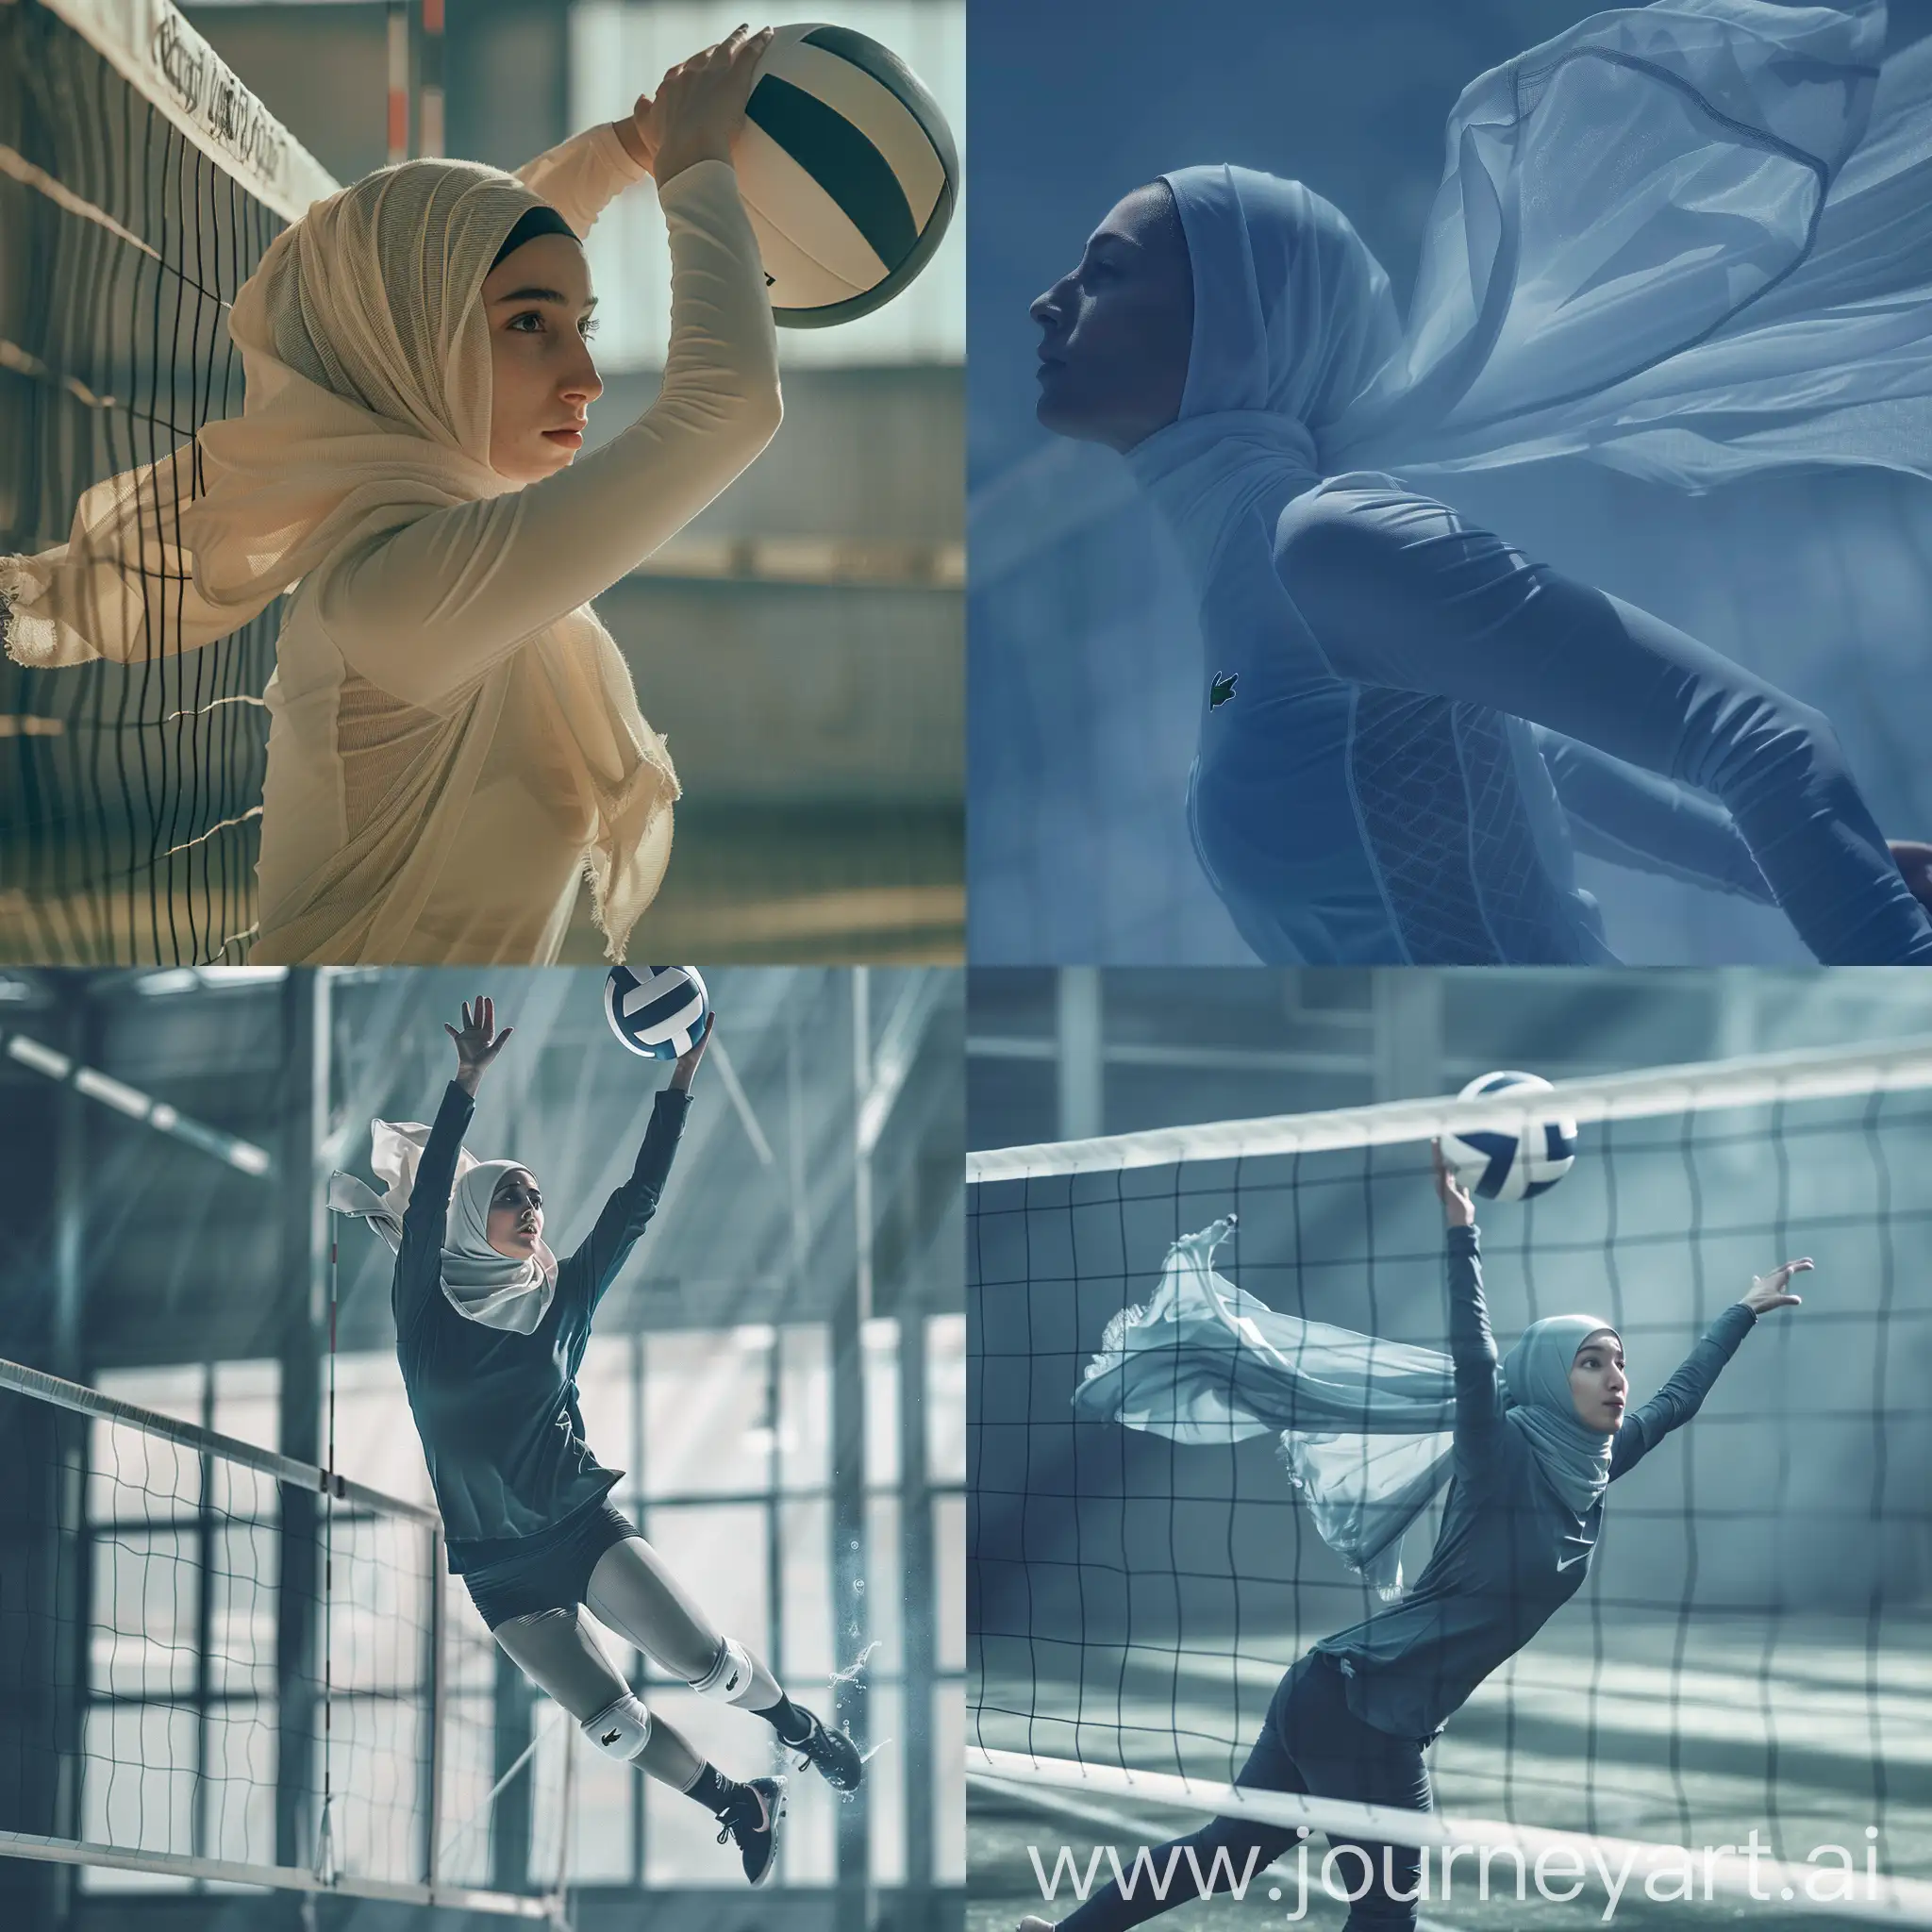 Woman volleyball player Hijab, horizontal View, Flight in air for Spike Style Installation Ambient, cinematic LUT, exuding confidence, blending Lacoste Modern fashion with the unique atmosphere of golf aesthetic, cinematic, intricate texture details, camera haze, camera blur. High movement.